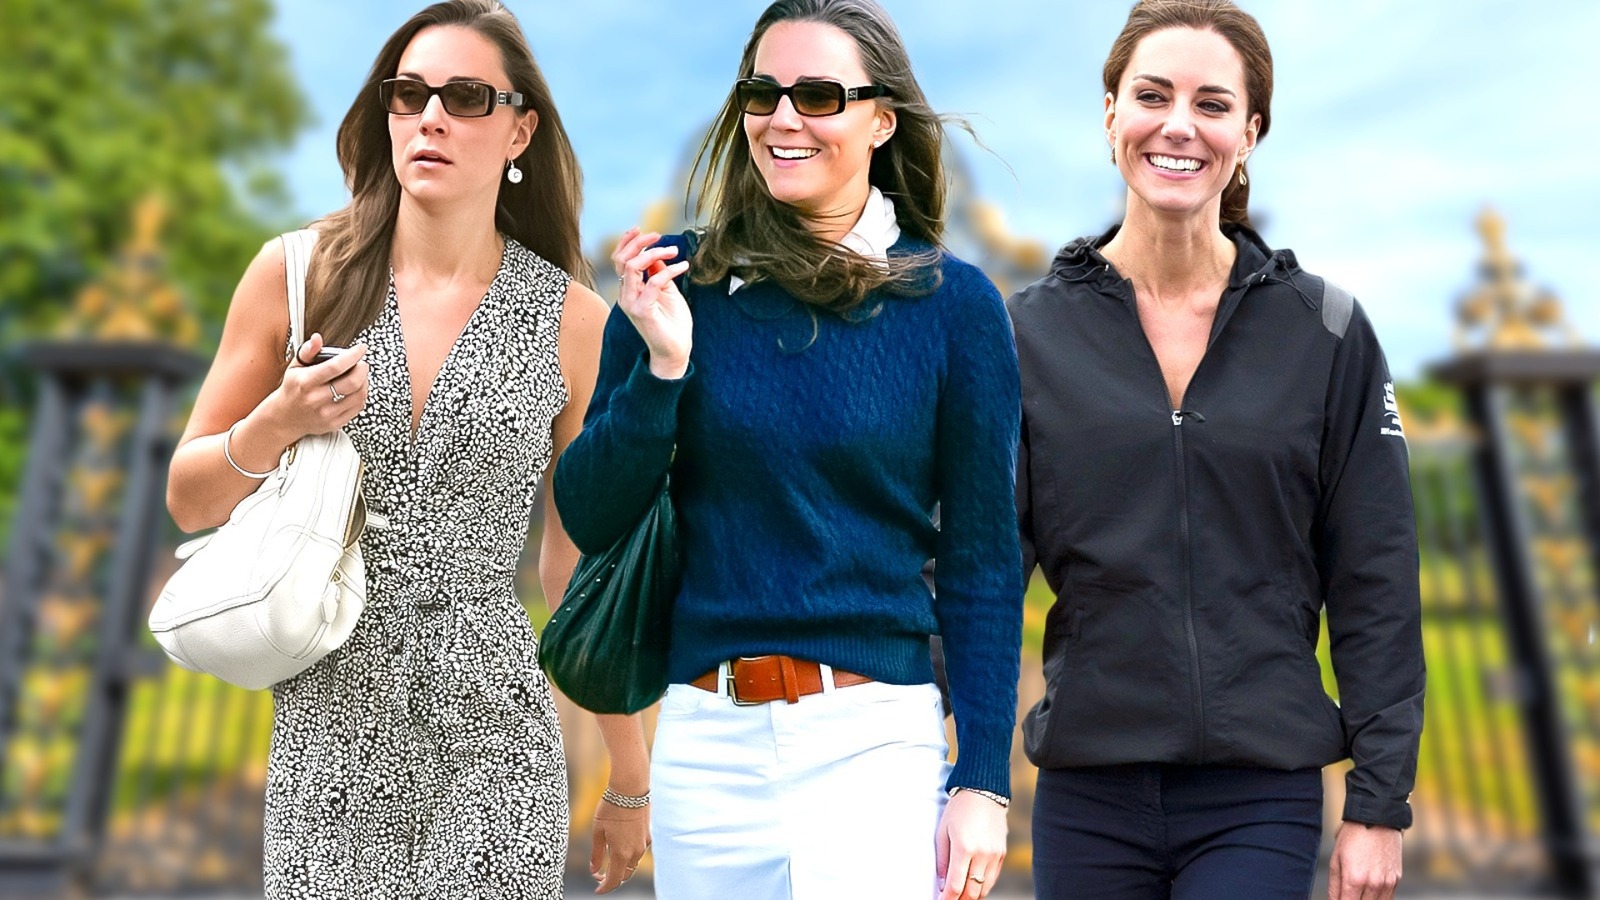 Kate Middleton Nailed the Casual Chic Look in This Blue Dress